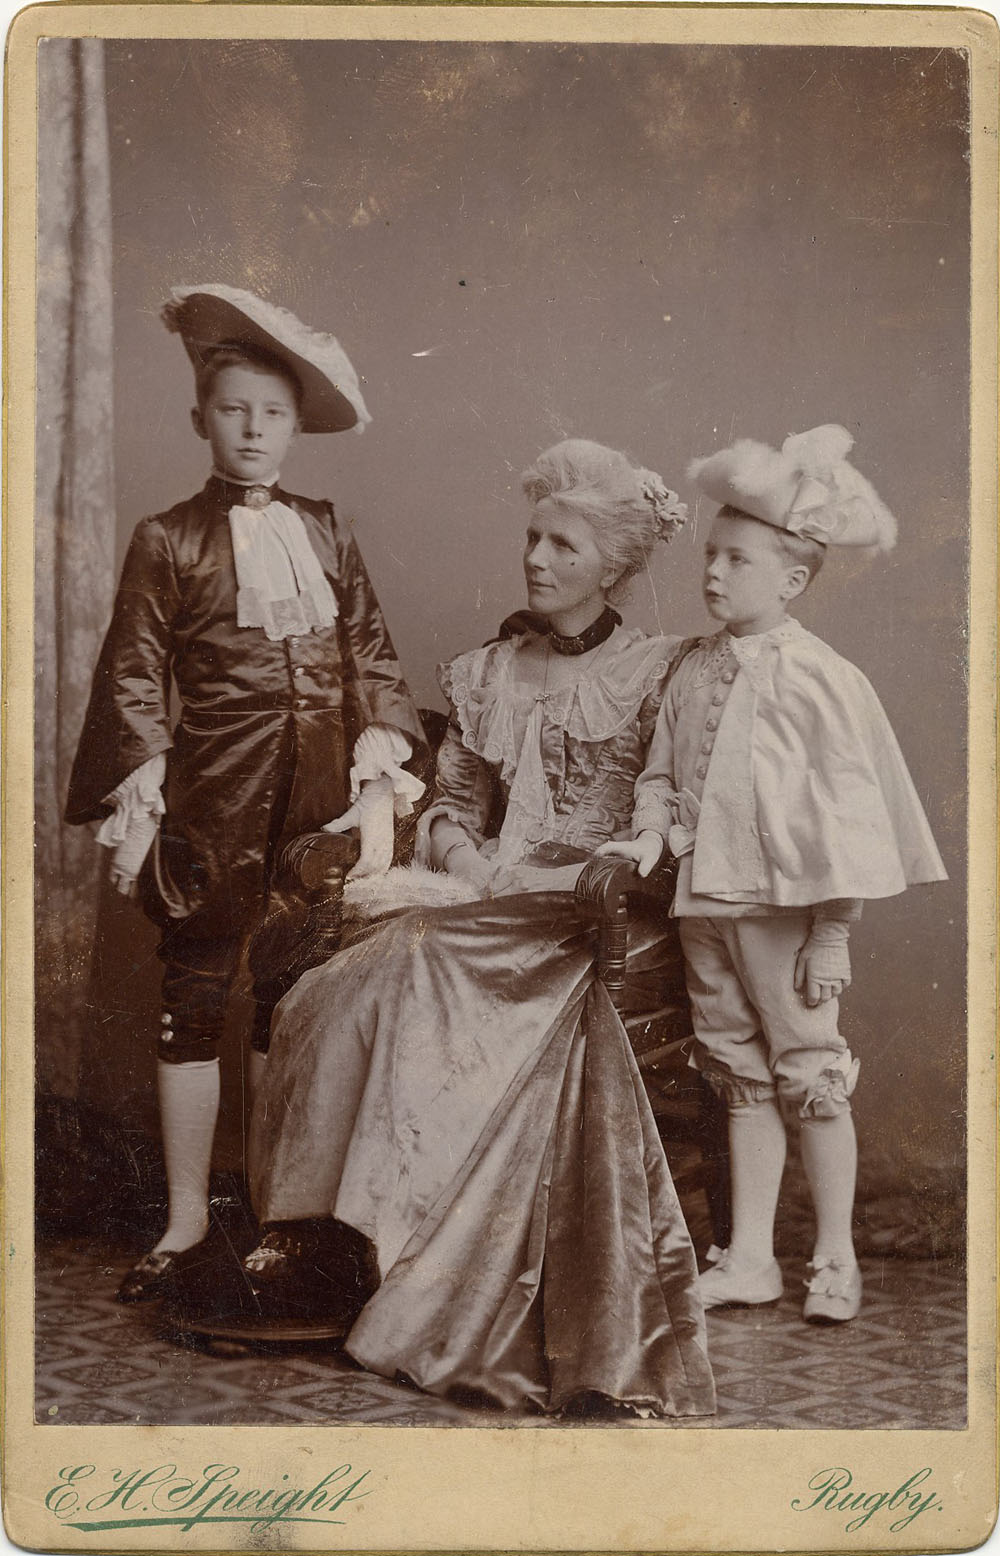 Portrait of Rupert, Alfred and Mary Ruth Brooke in period costume. Taken in 1898 by E.H. Speight, Rugby (RCB/Ph/4).